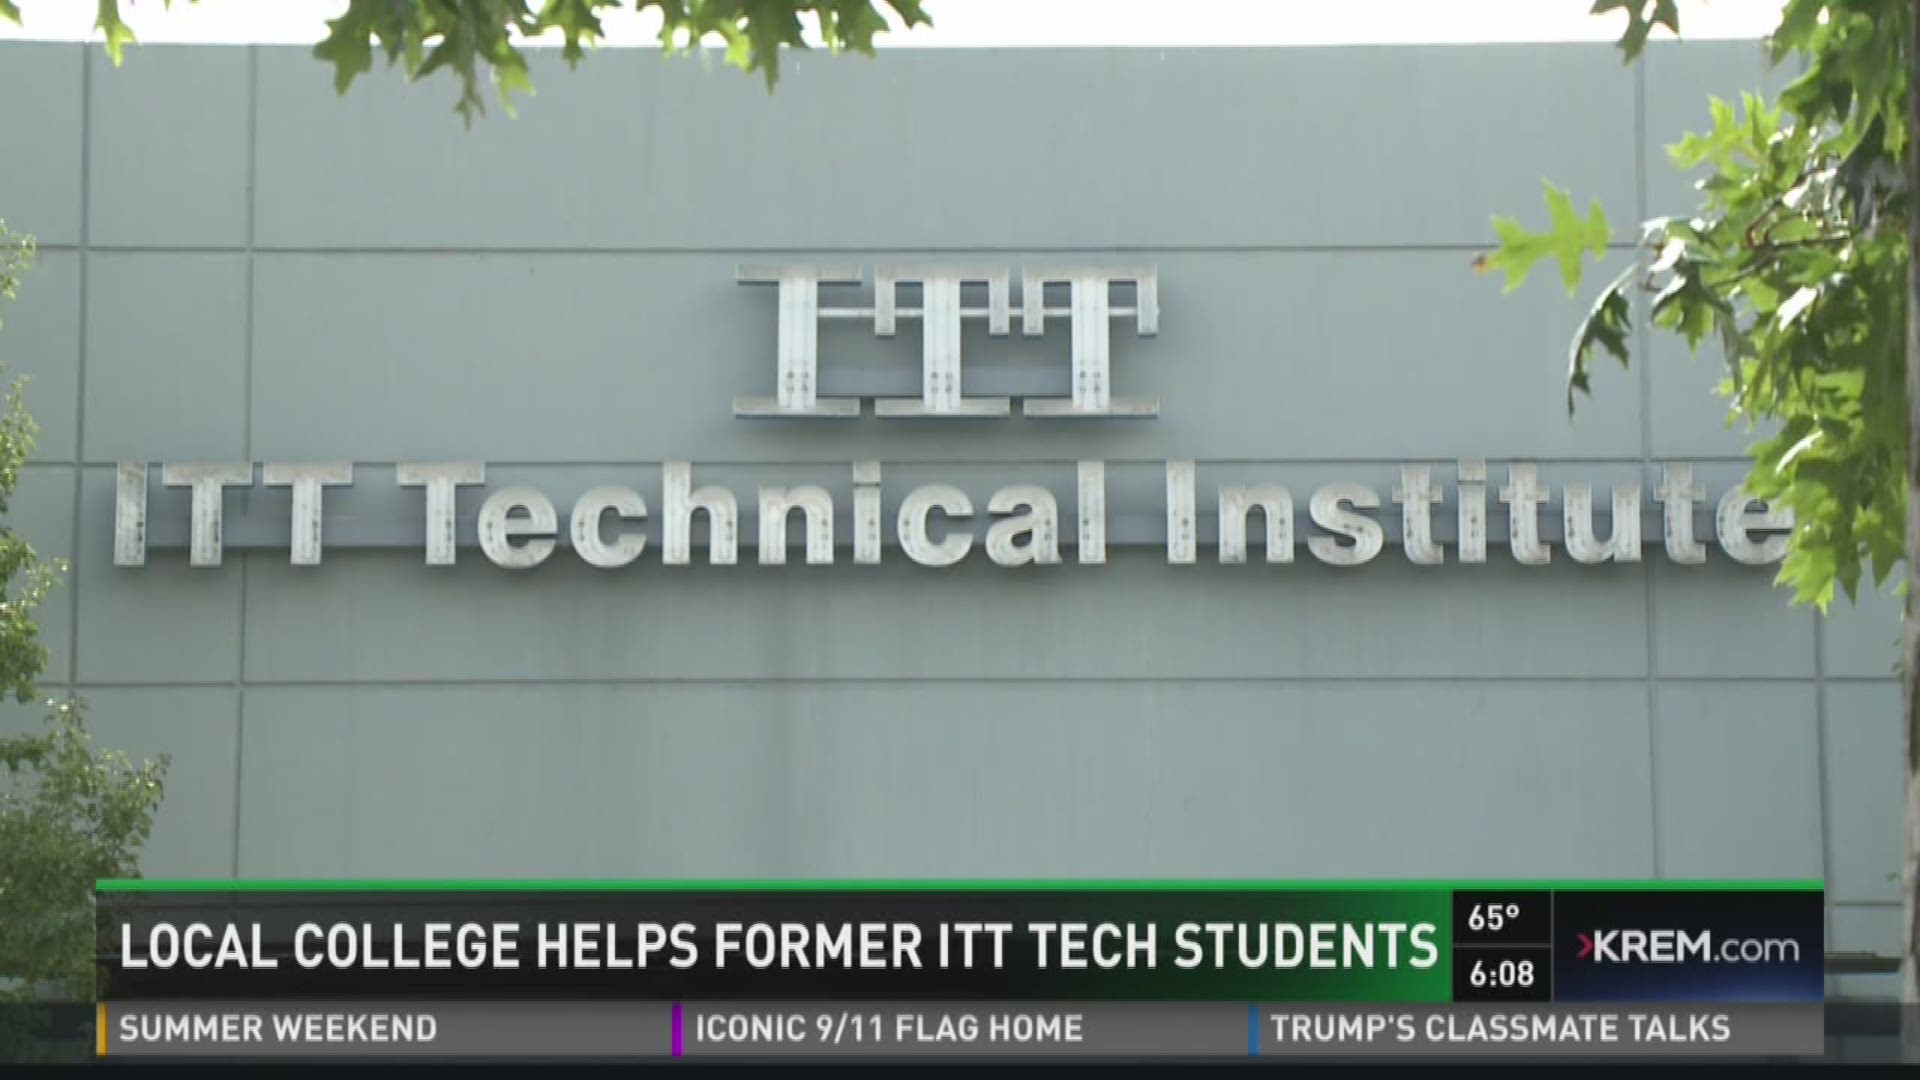 Students want answers after the abrupt closure of all ITT Tech locations earlier this week. KREM 2 News reporter Alexa Block has more on how local community colleges are helping those left in the lurch. (9/8/16)